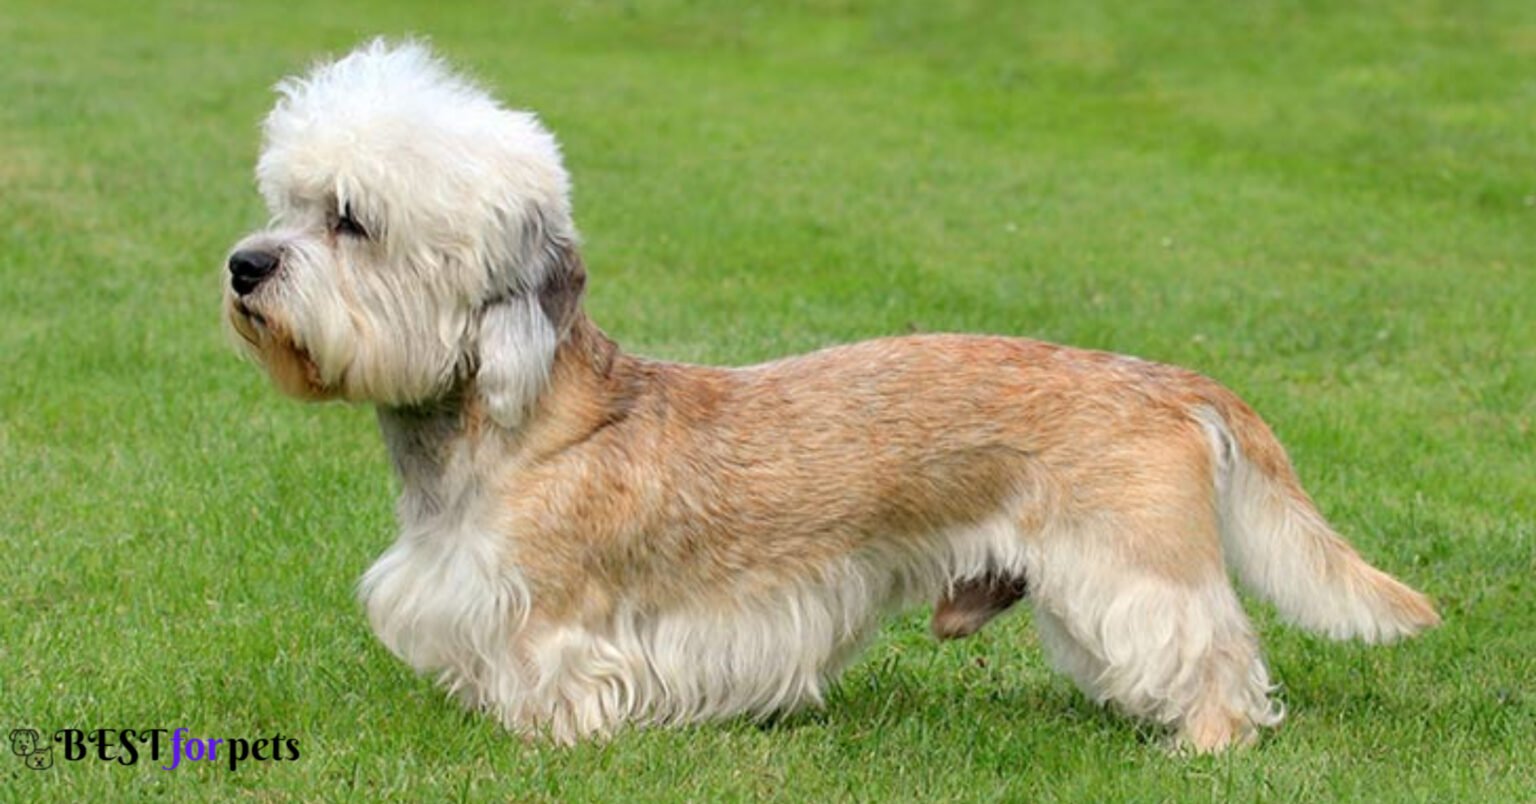 Dandie Dinmont Terrier- Most Eye-Catching Red Coated Dog Breeds